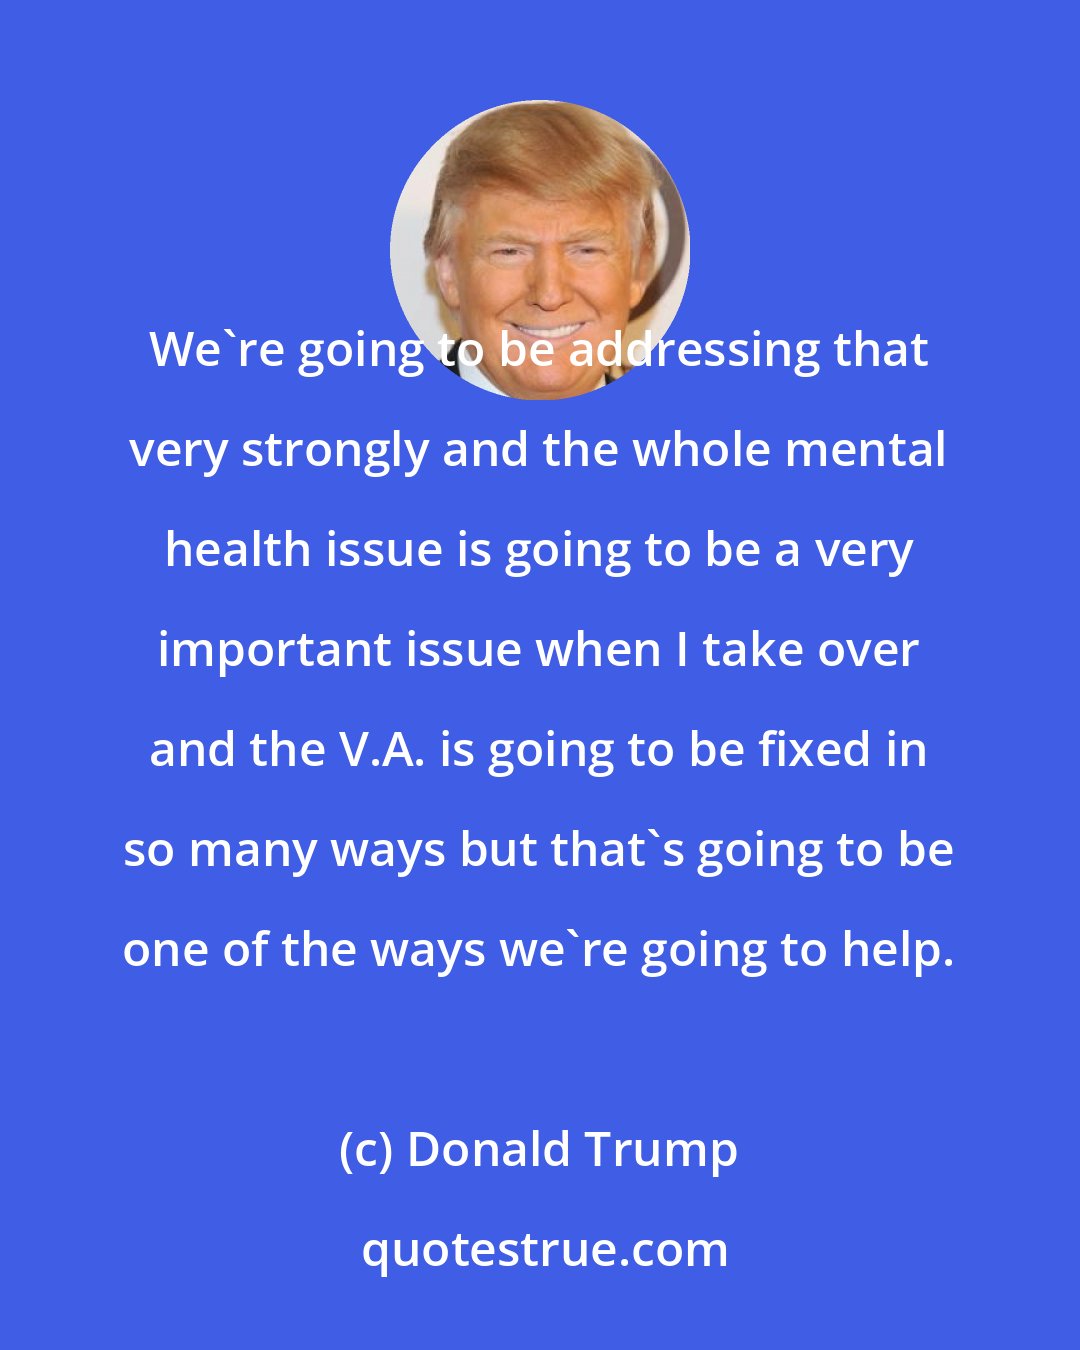 Donald Trump: We're going to be addressing that very strongly and the whole mental health issue is going to be a very important issue when I take over and the V.A. is going to be fixed in so many ways but that's going to be one of the ways we're going to help.